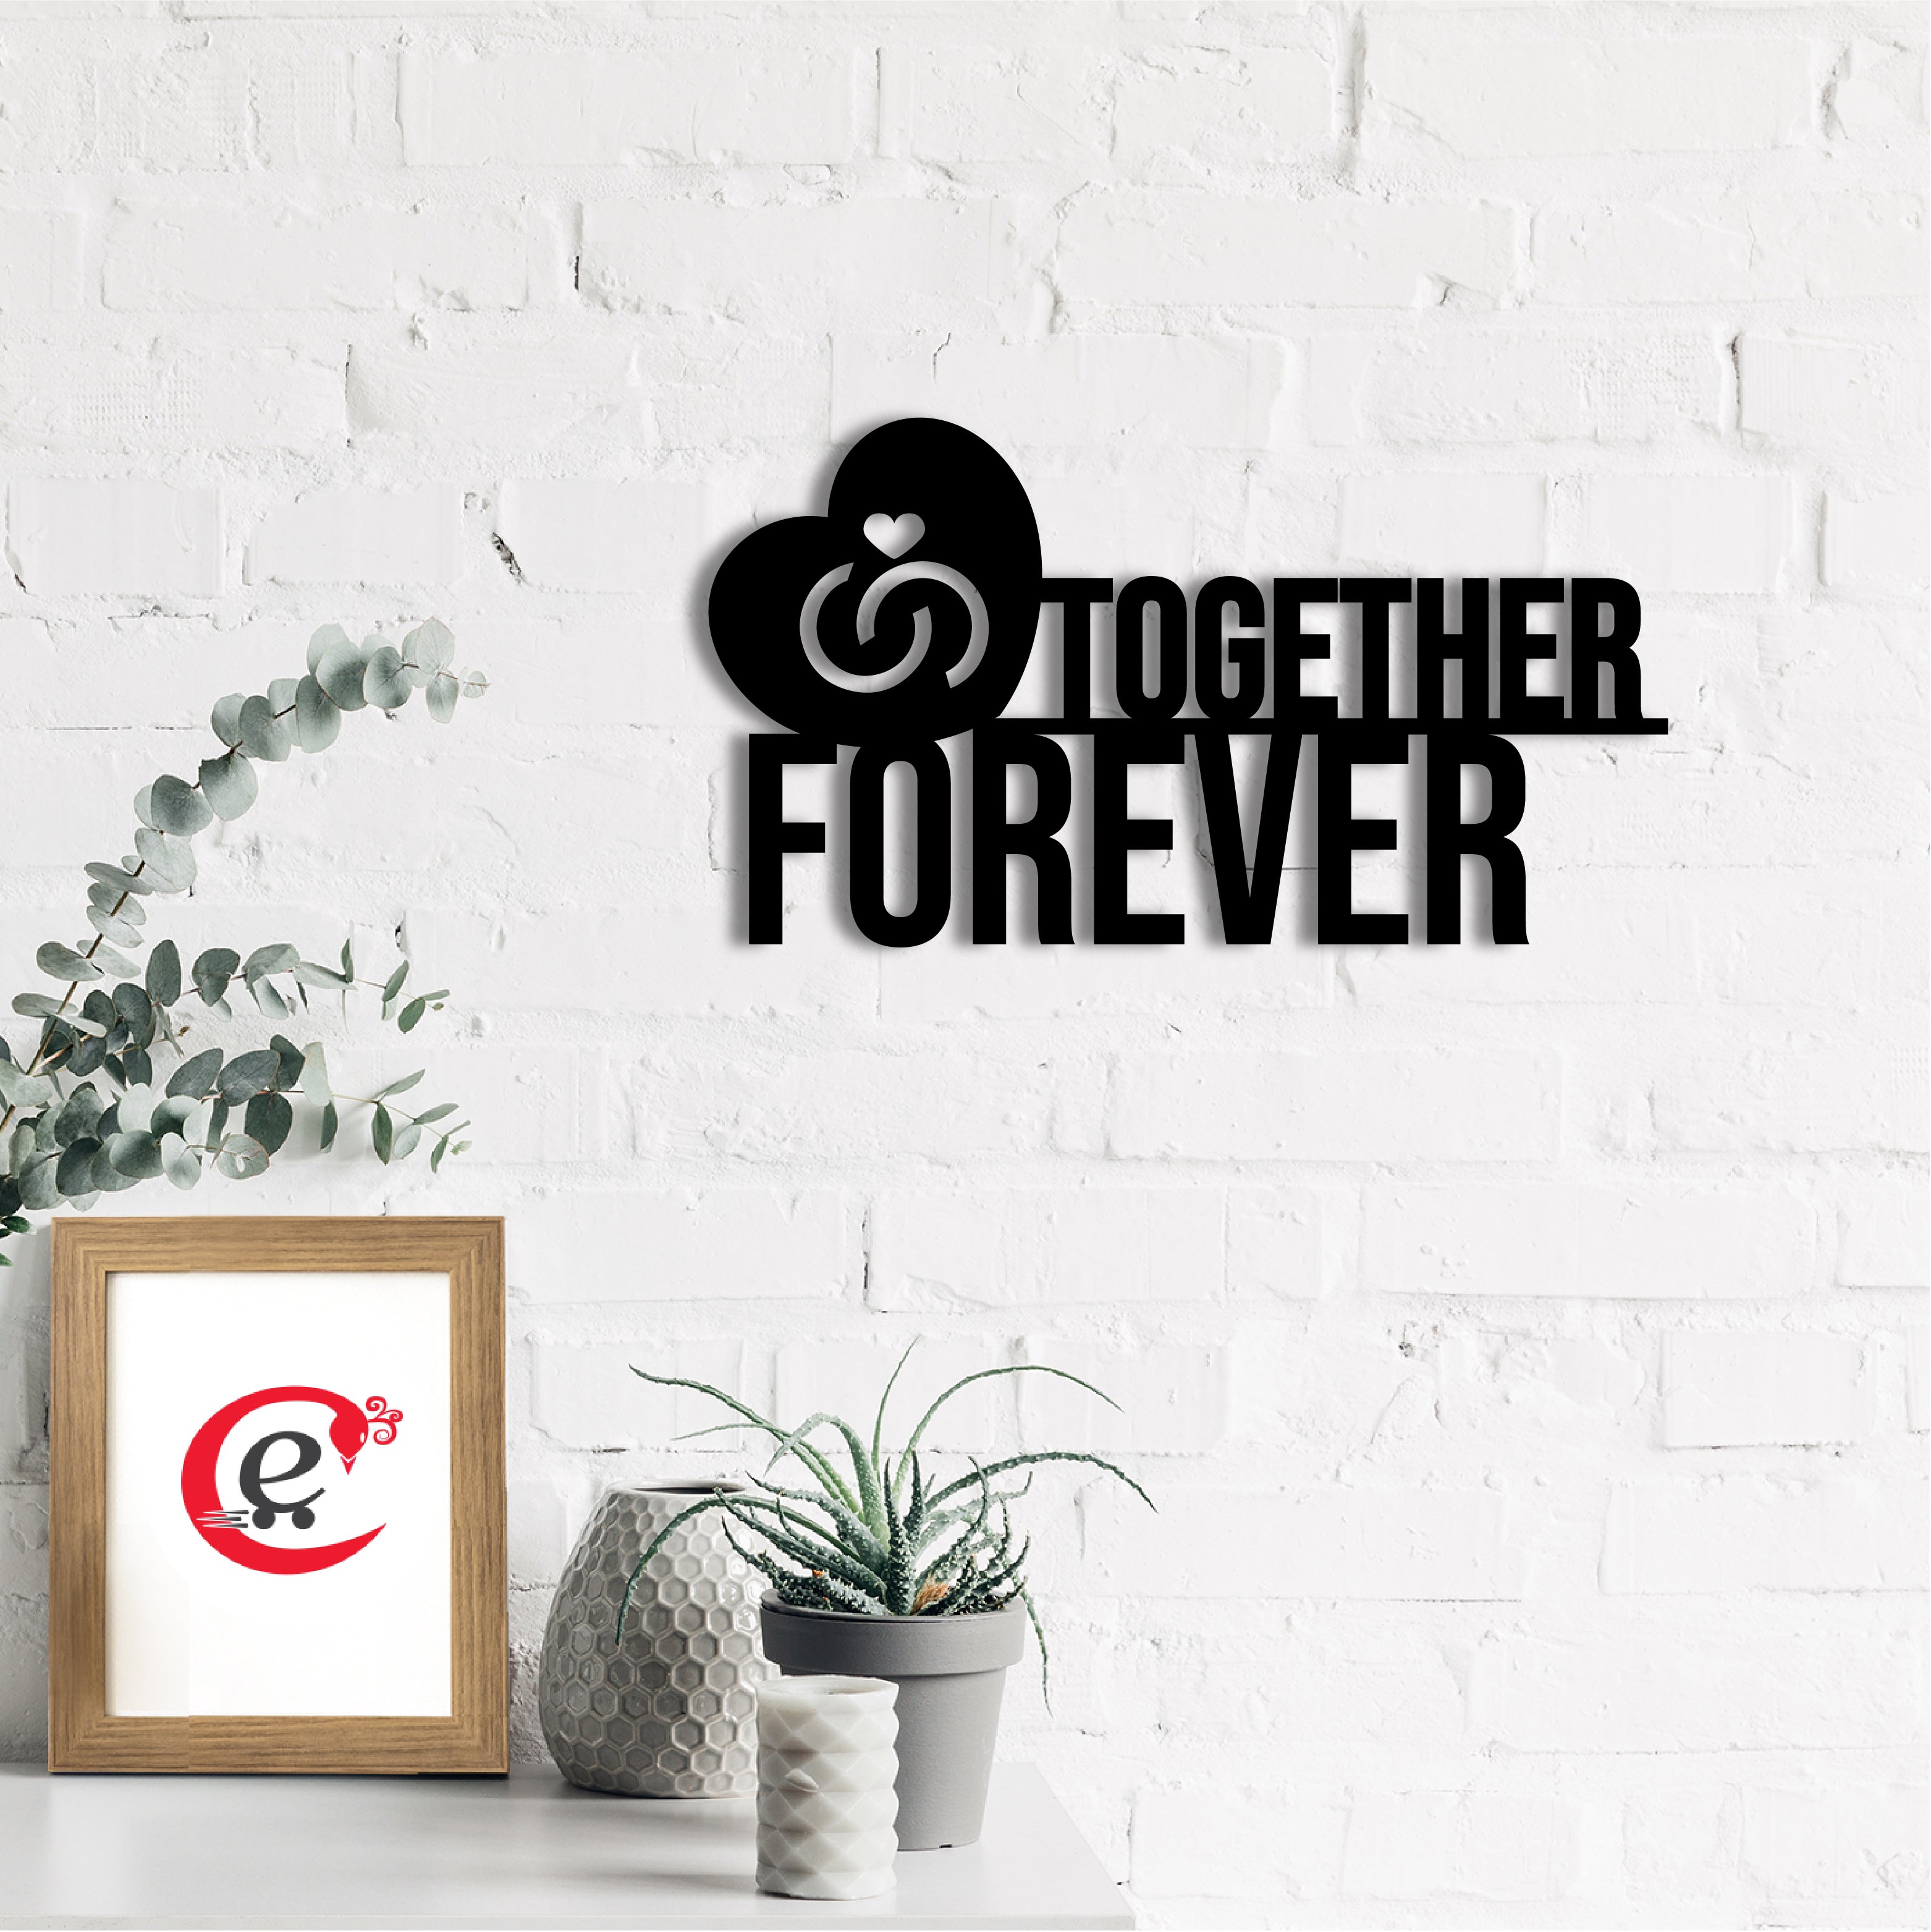 "Together Forever with Love band" Black Engineered Wood Wall Art Cutout, Ready to Hang Home Decor